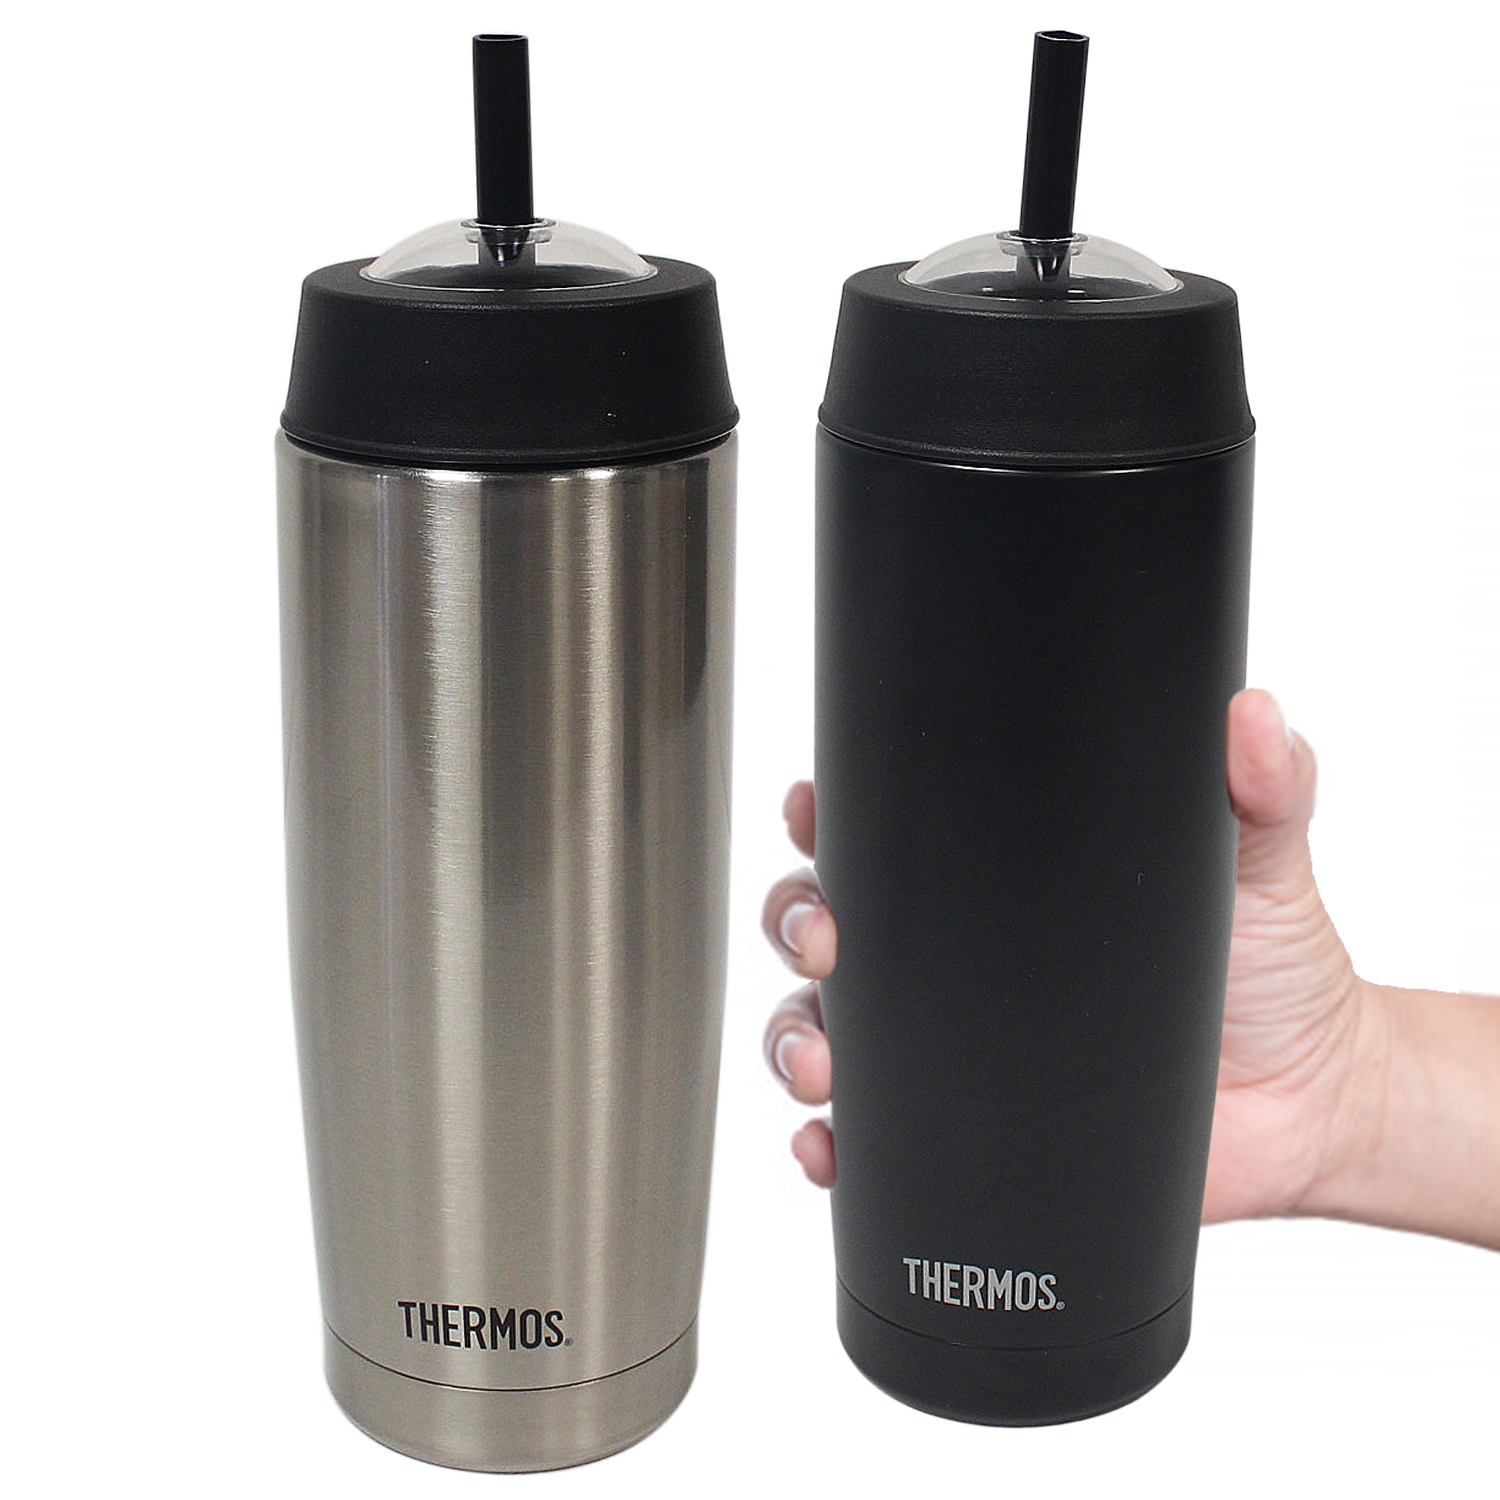 Thermos Cold Cup Stainless Steel Black 